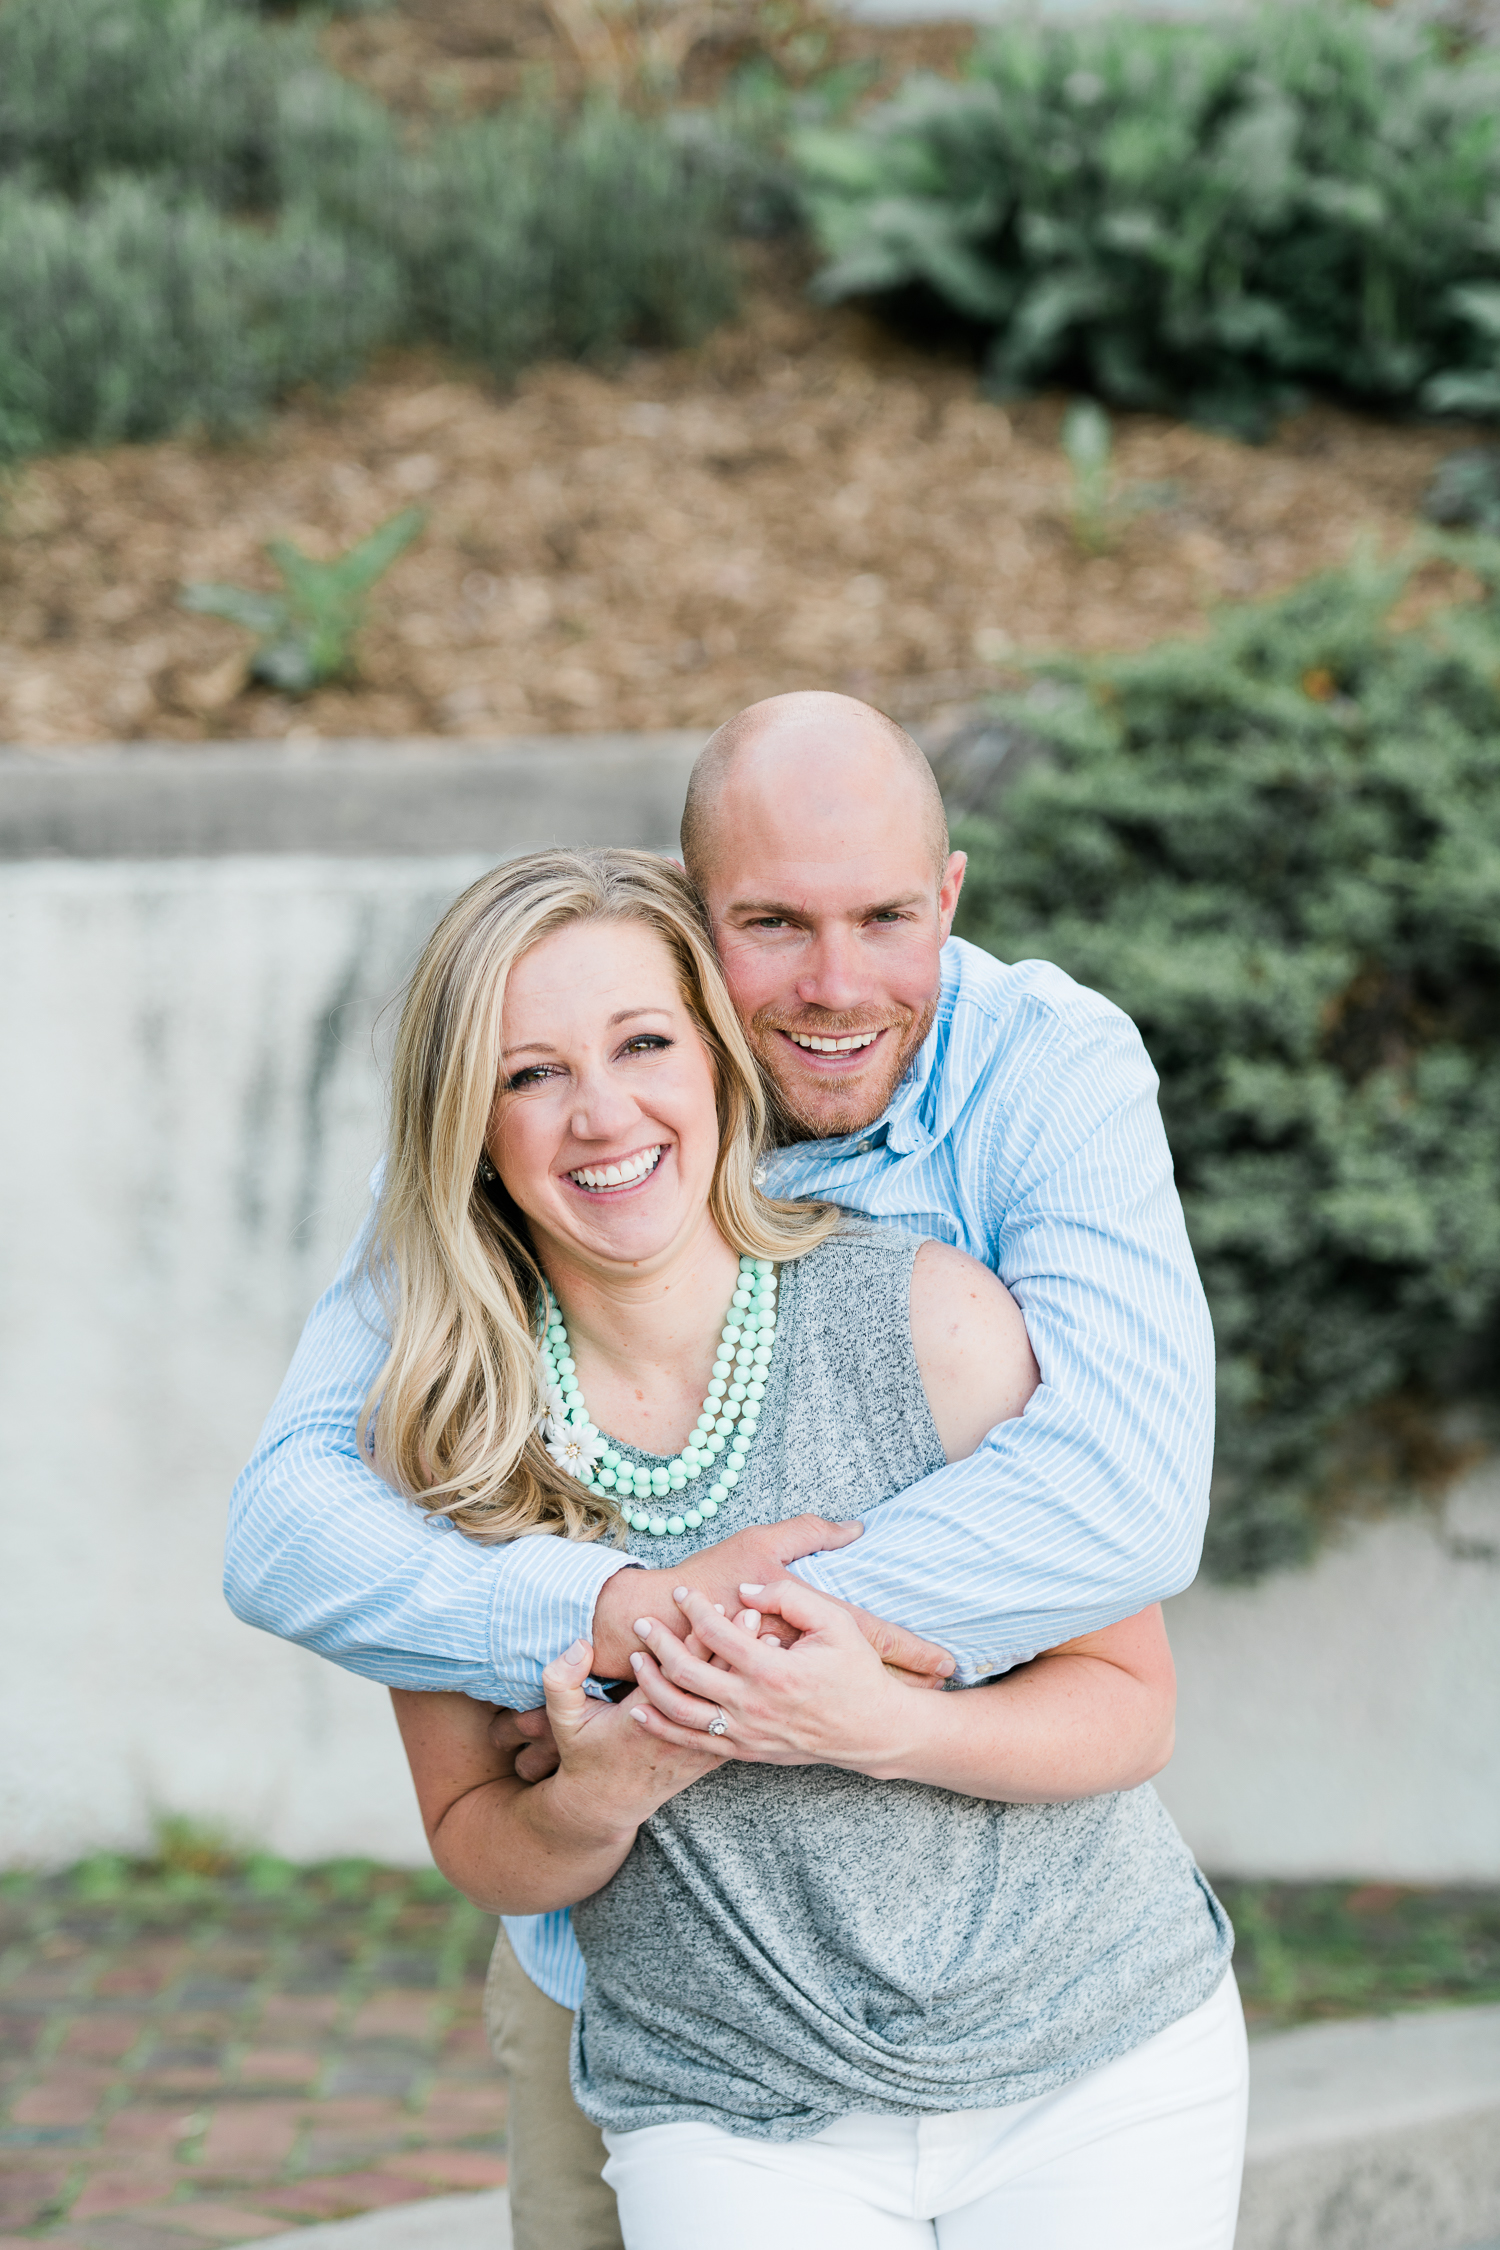 Engaged couple in gray and light blue hugging tightly while smiling